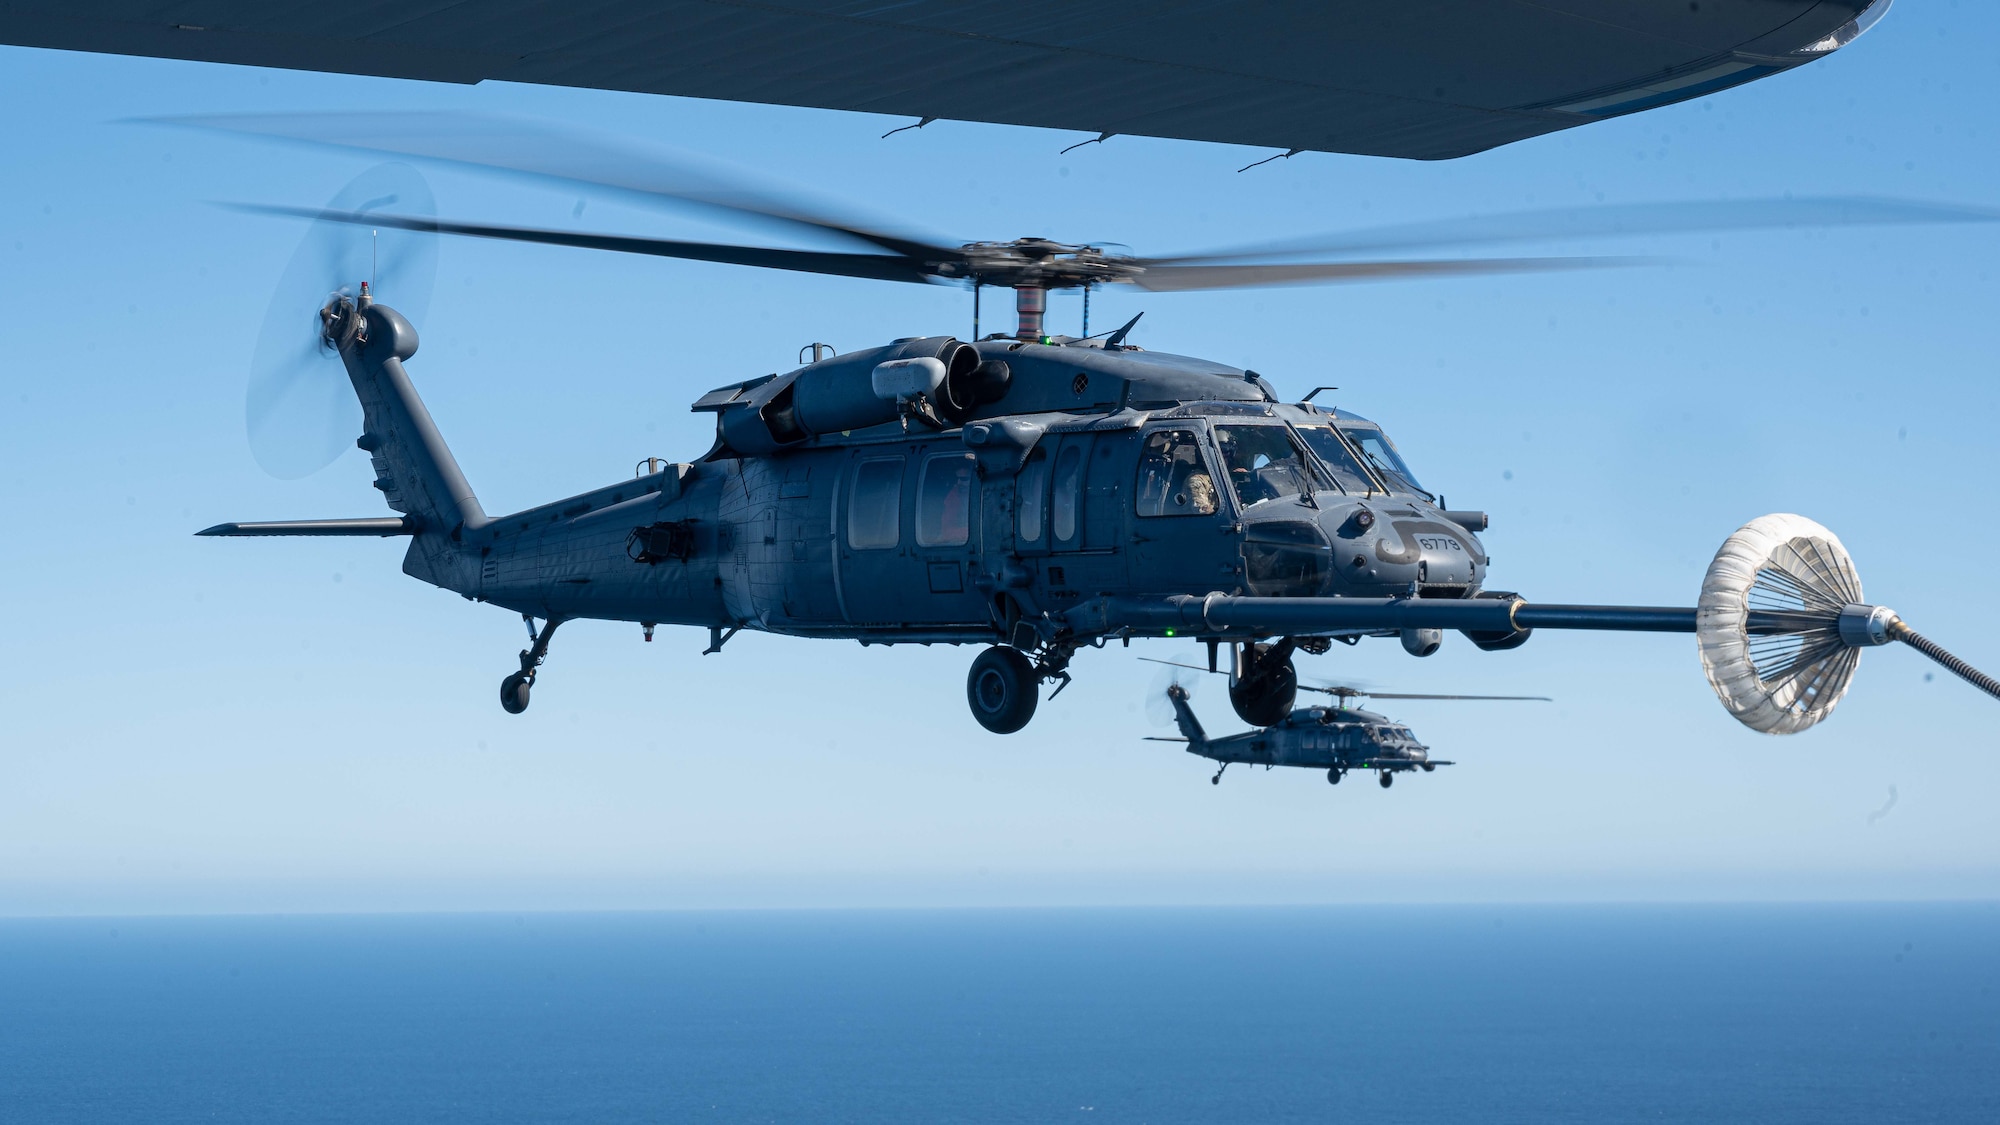 Pictured above is a helicopter refueling mid-air.